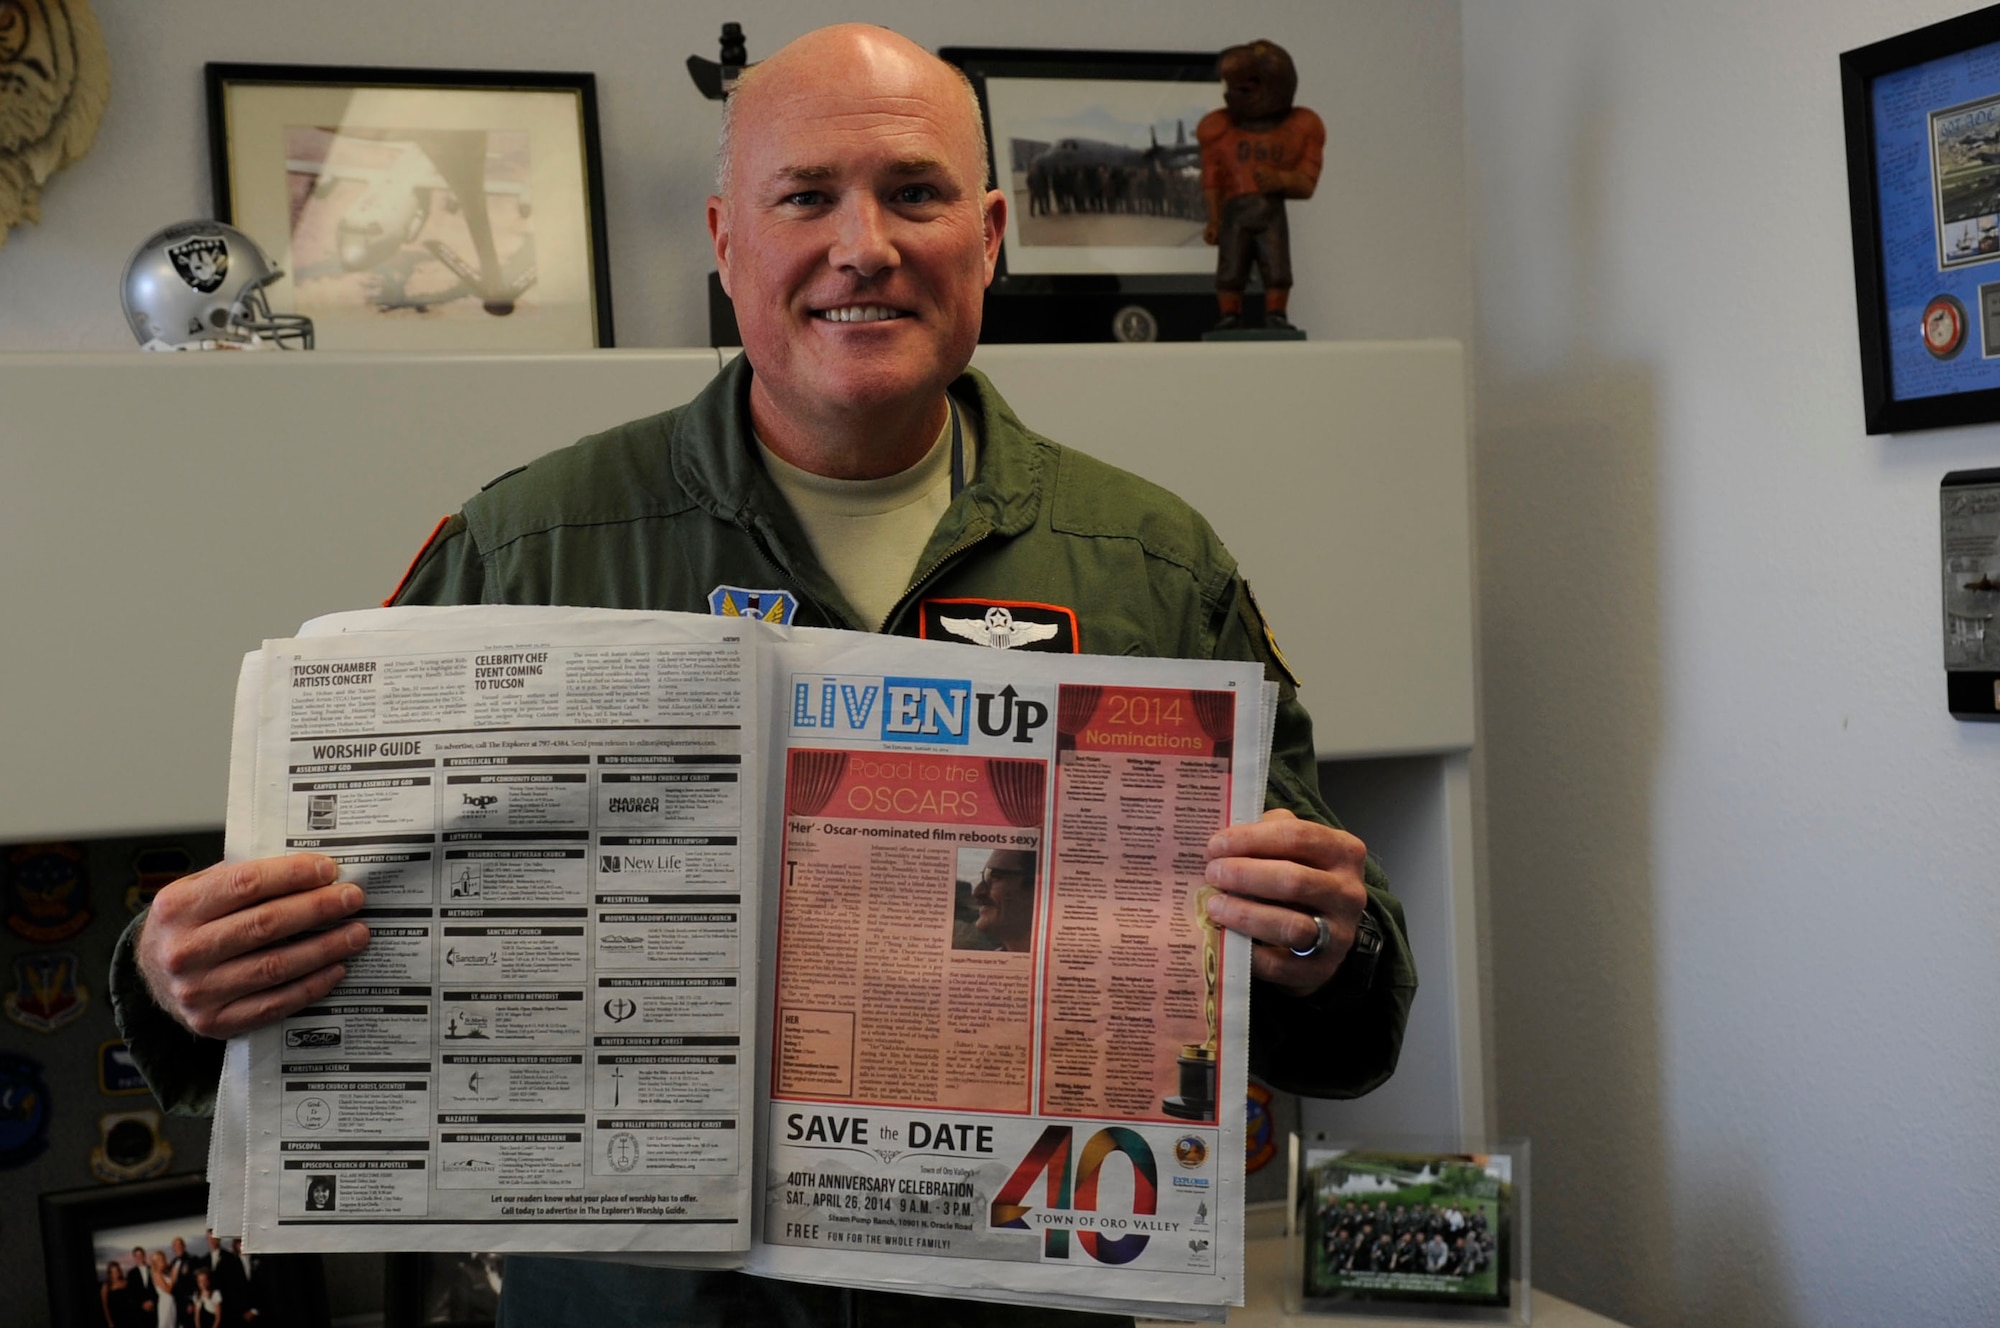 U.S. Air Force Lt. Col. Patrick King, 755th Operations Support Squadron assistant director of operations, holds up a newspaper containing his most recent movie review at Davis-Monthan Air Force Base, Ariz., Jan. 28, 2013. King started writing movie reviews as a hobby on Facebook in 2010 and recently got hired by Explorer Newspaper to write weekly reviews. (U.S. Air Force photo by Airman 1st Class Betty R. Chevalier/released)